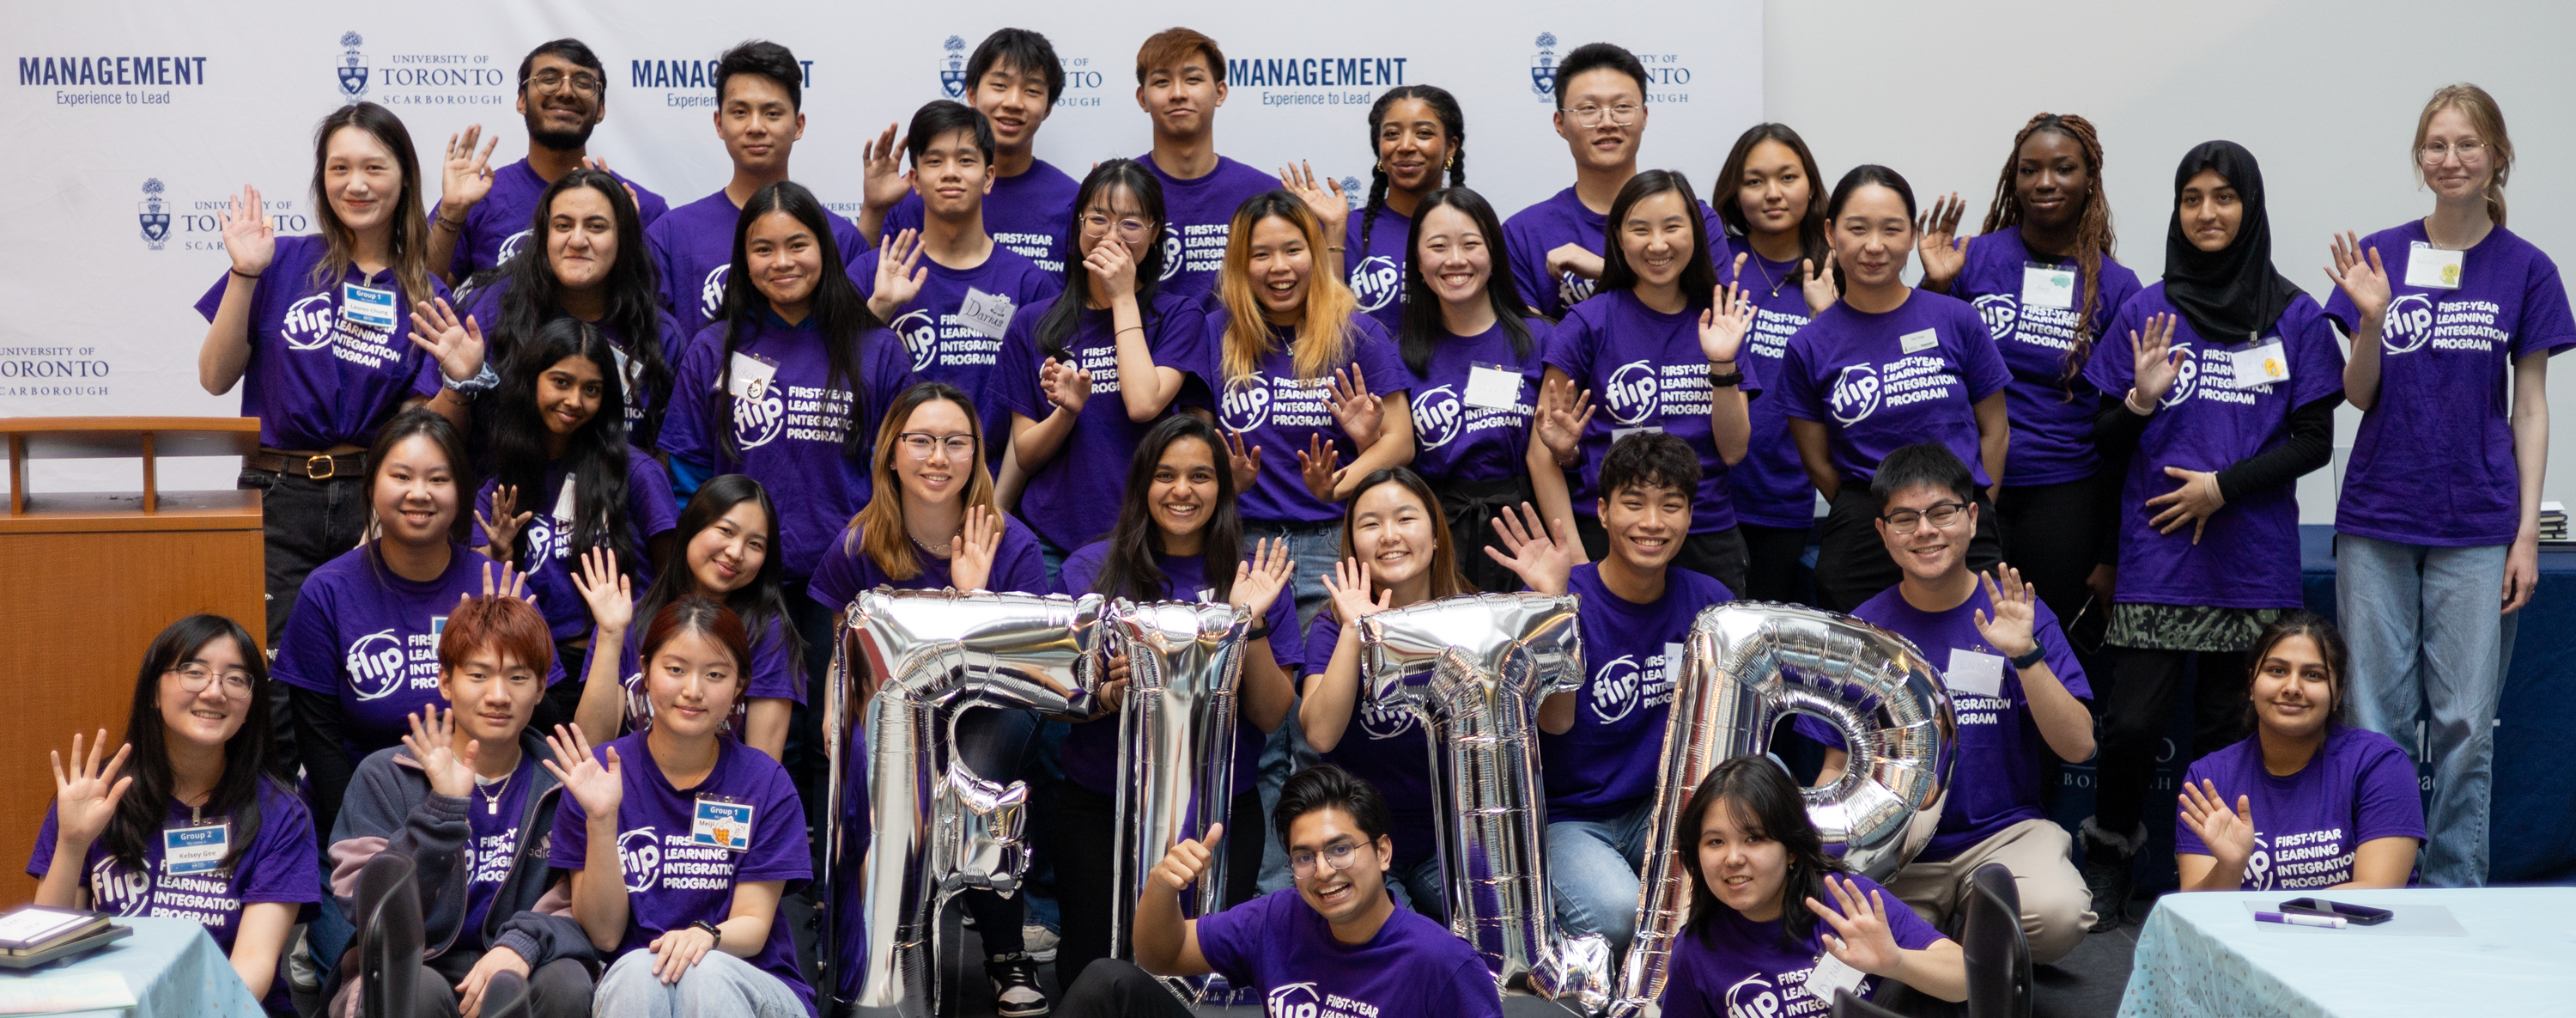 A group of Management students wearing U of T apparel pose for a group photo while smiling widely in the Instructional Centre at the University of Toronto Scarborough with silver balloons that spell "Flip" visible in the foreground.